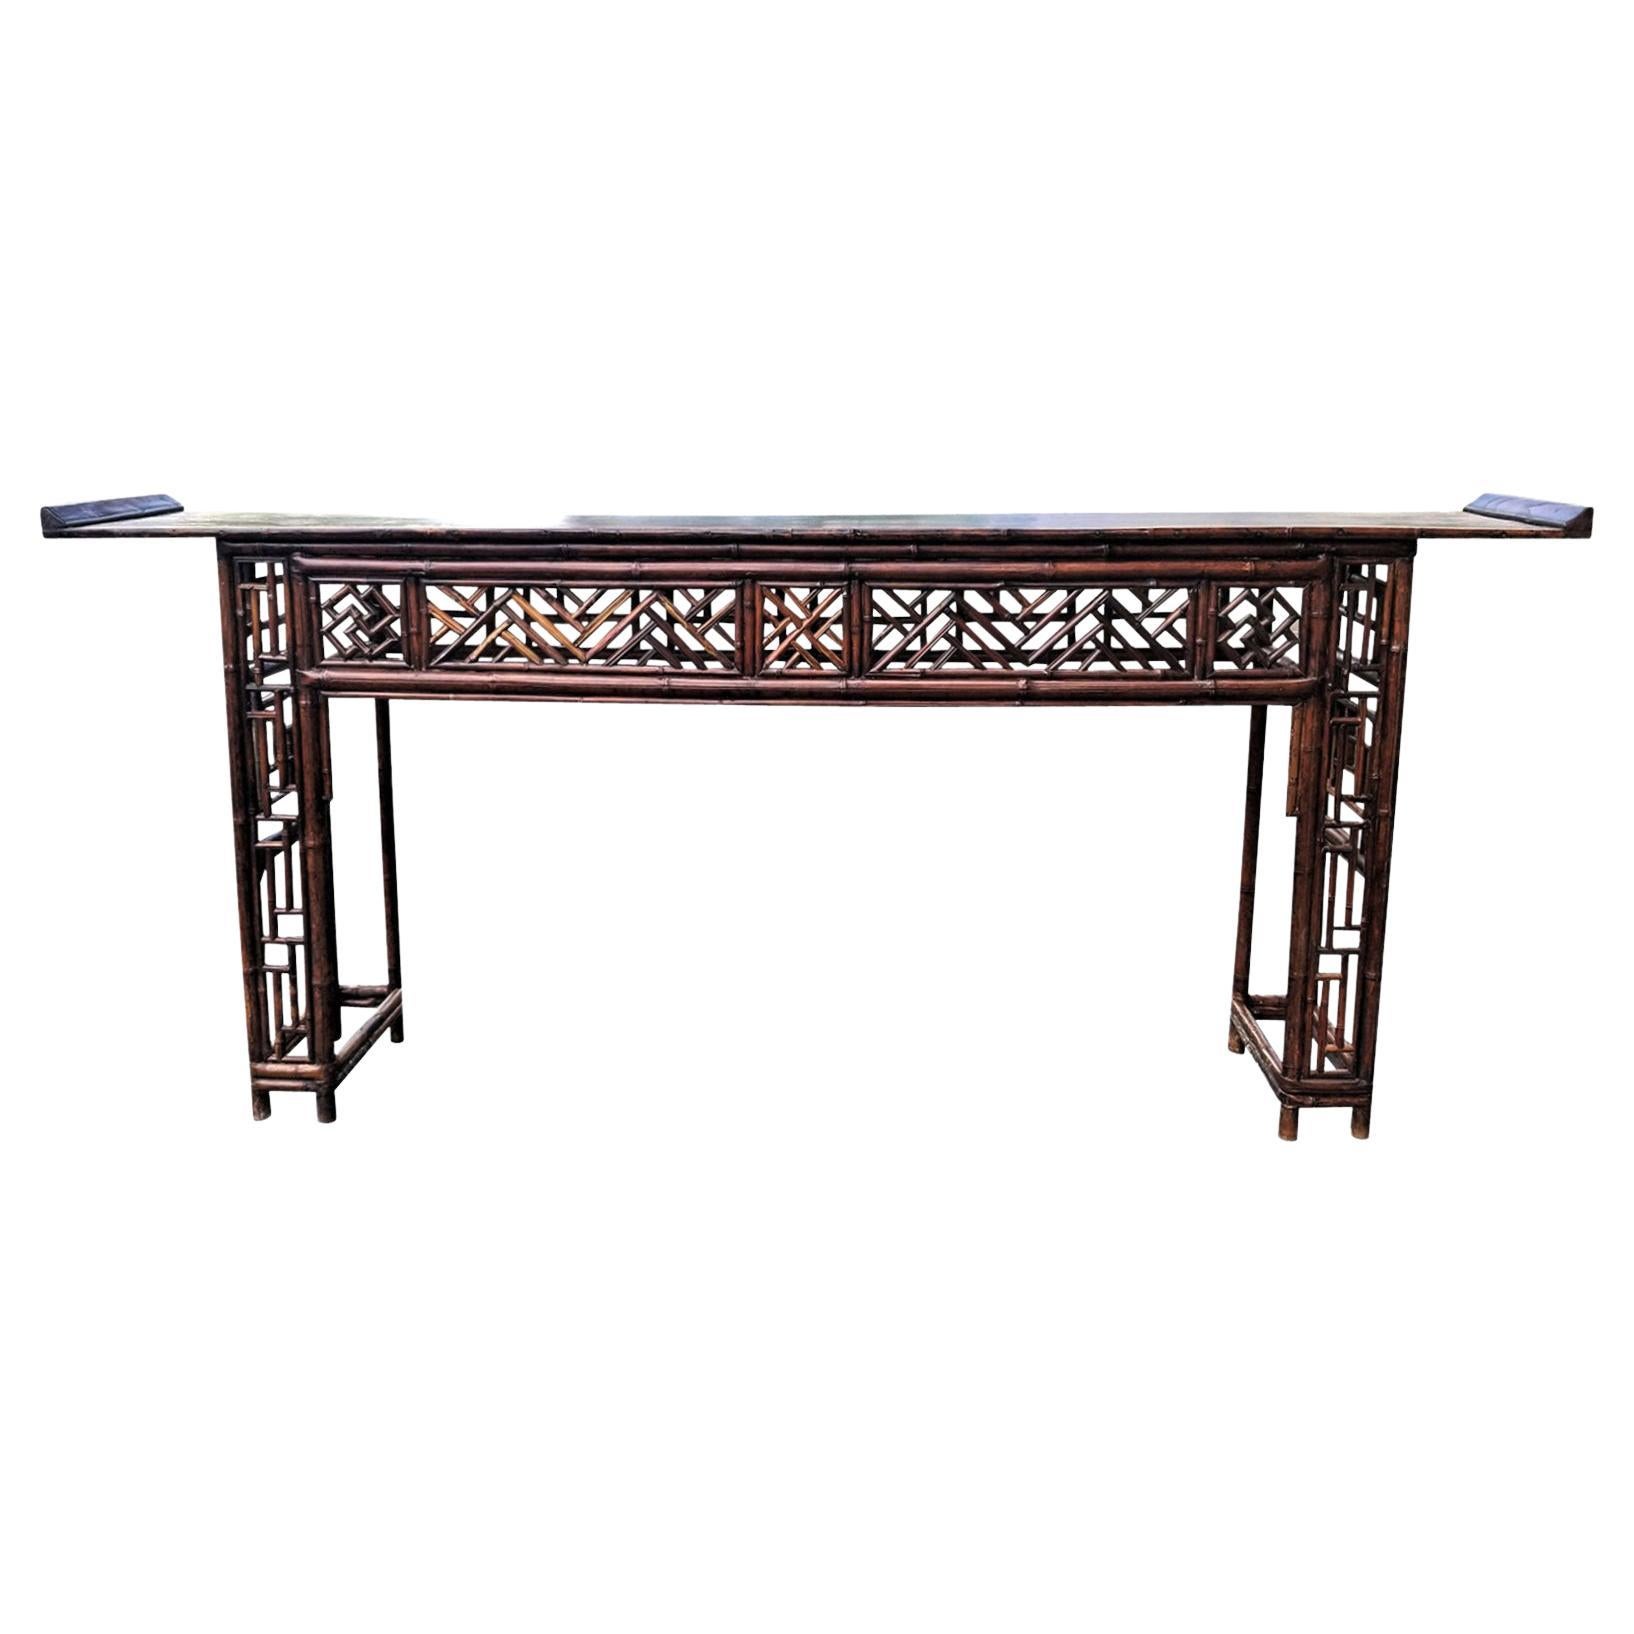 19th Century, circa 1860-1880 Beautiful Fret Work Alter Table For Sale